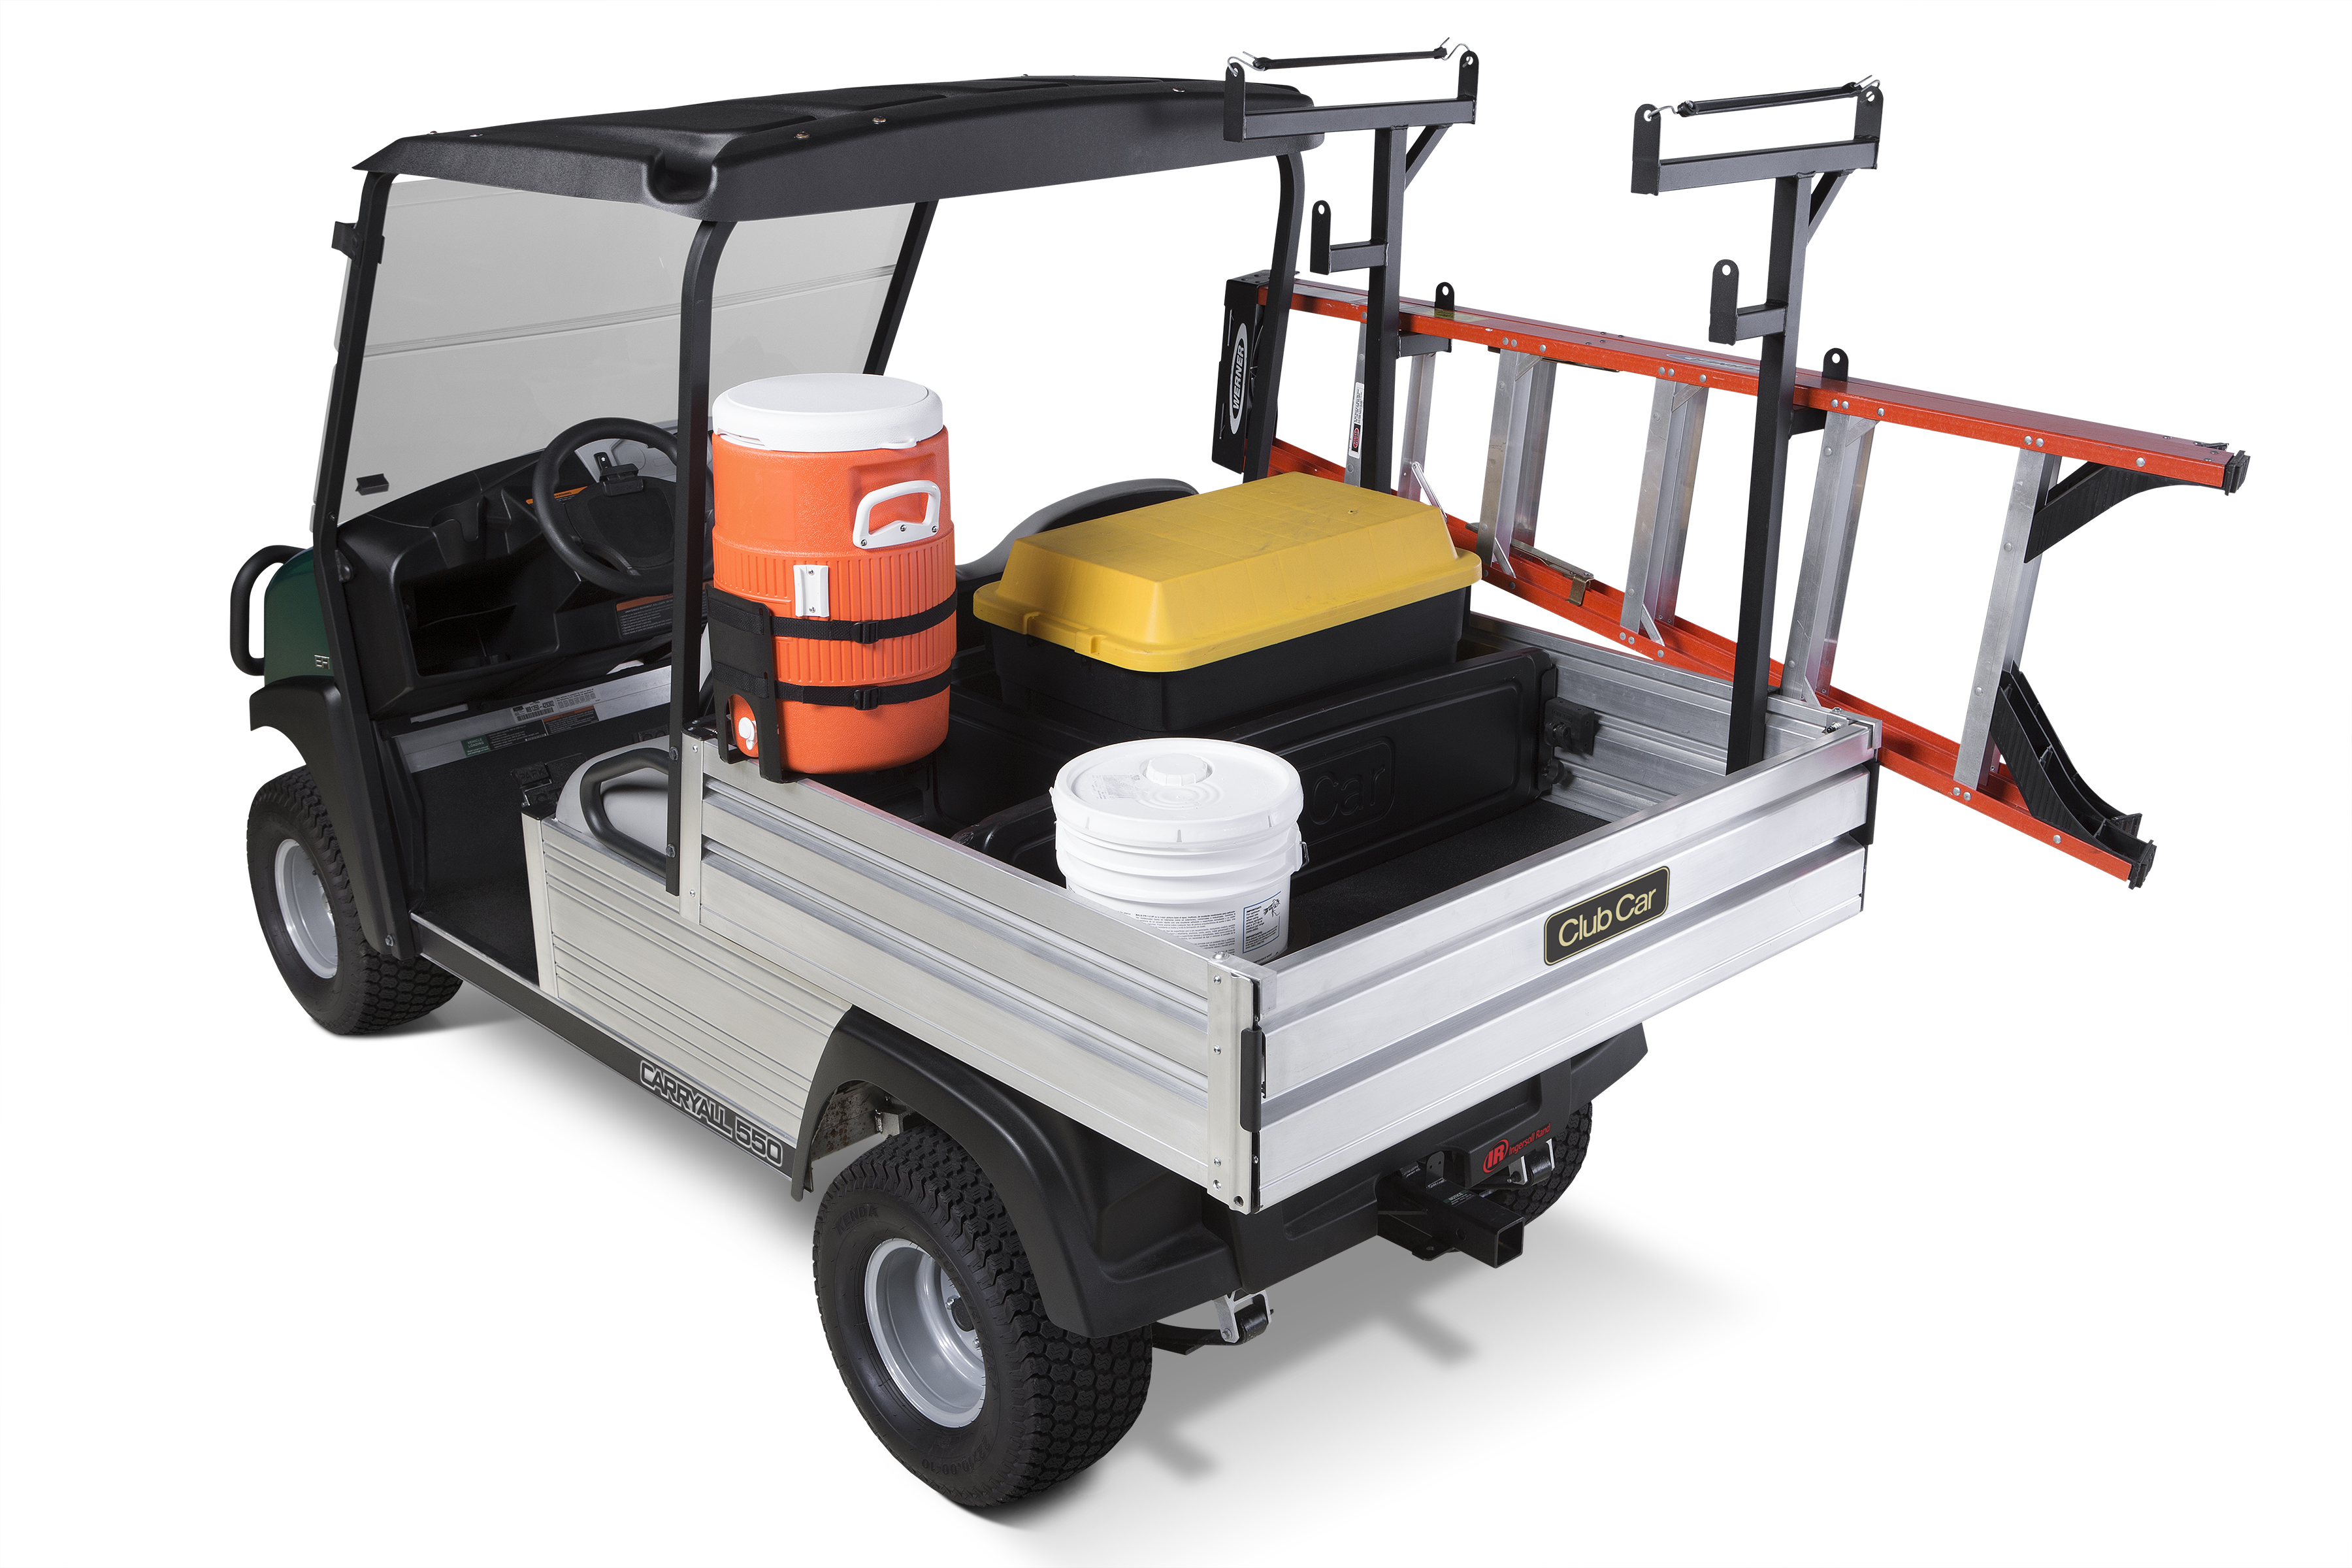 Club Car’s New Carryall® Utility Vehicles Named to Landscape and